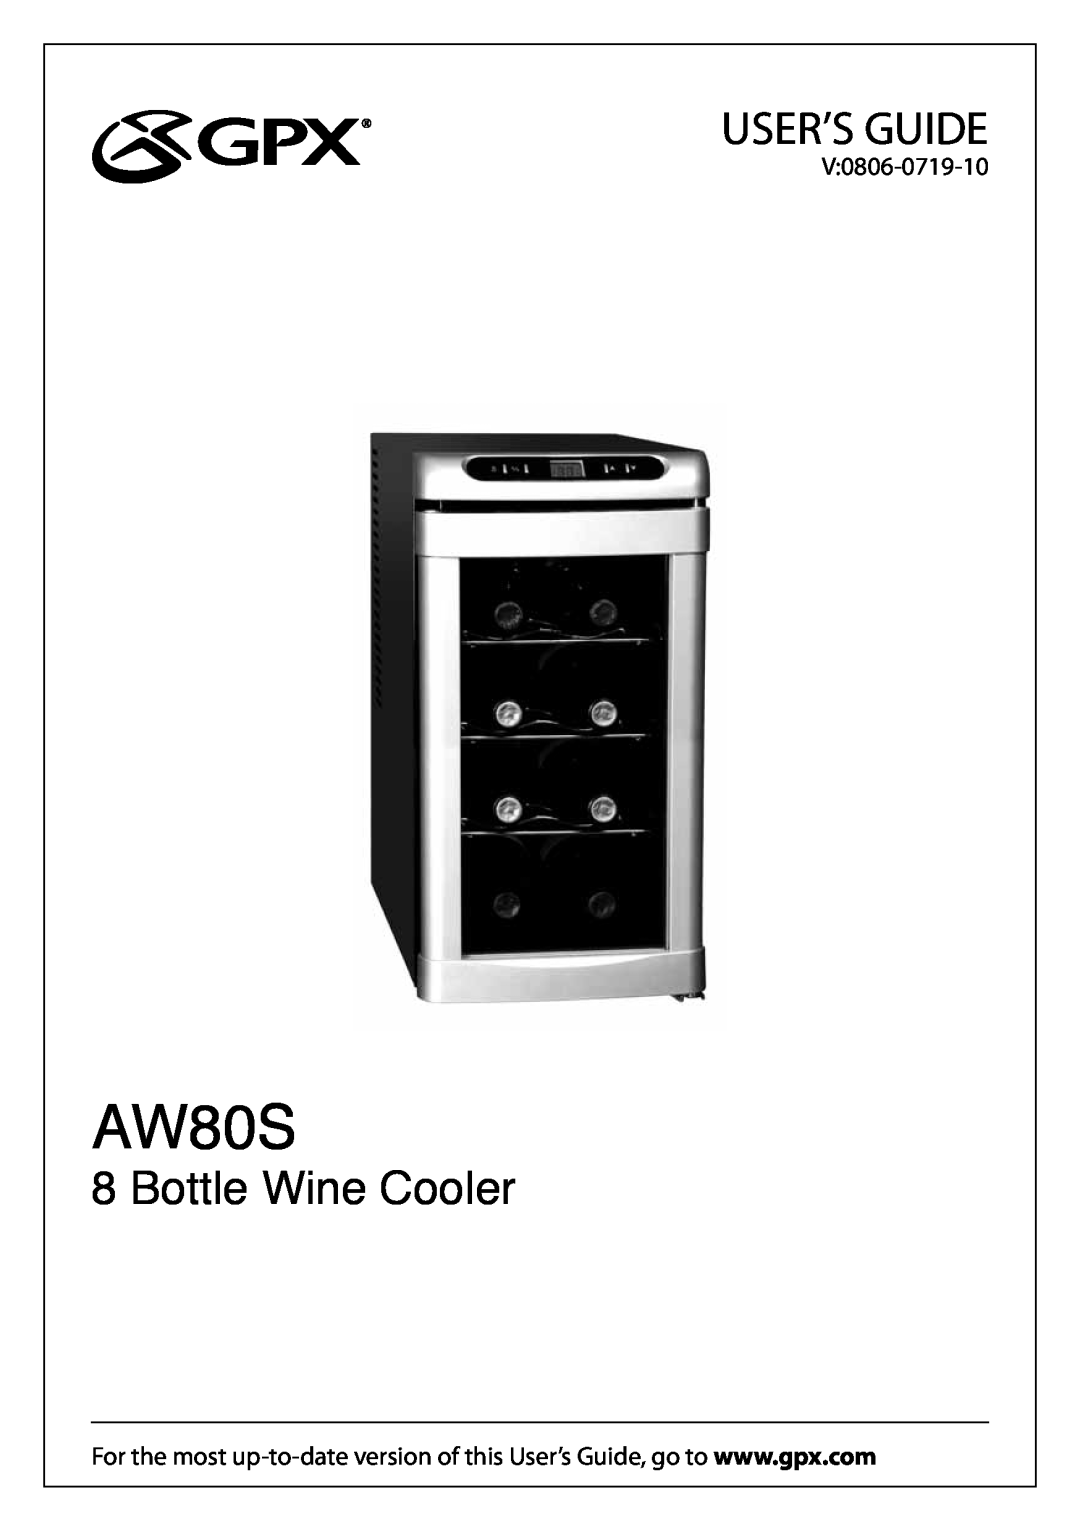 GPX 0806-0719-10 manual AW80S, User’S Guide, Bottle Wine Cooler 